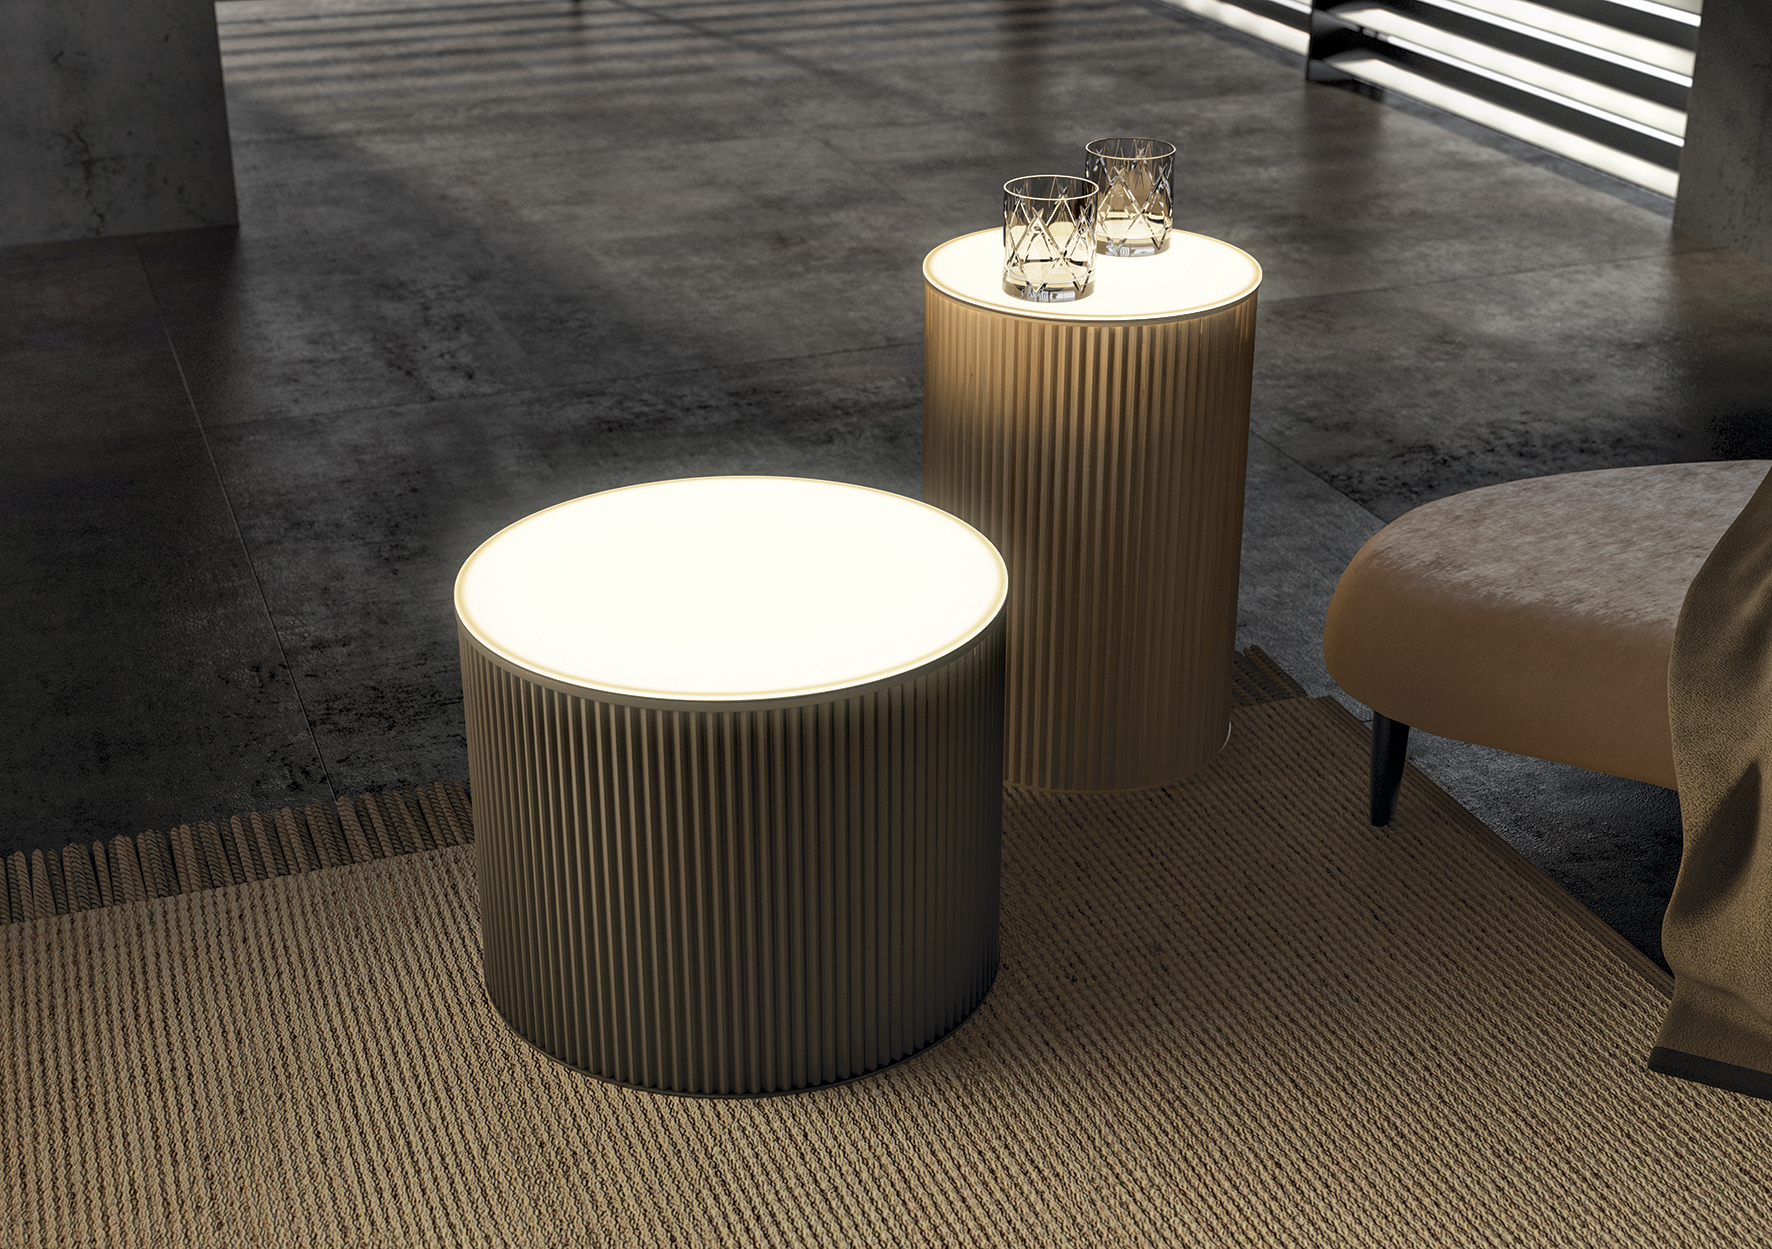 The new integrated light collection by L&S - Staff Editoriale